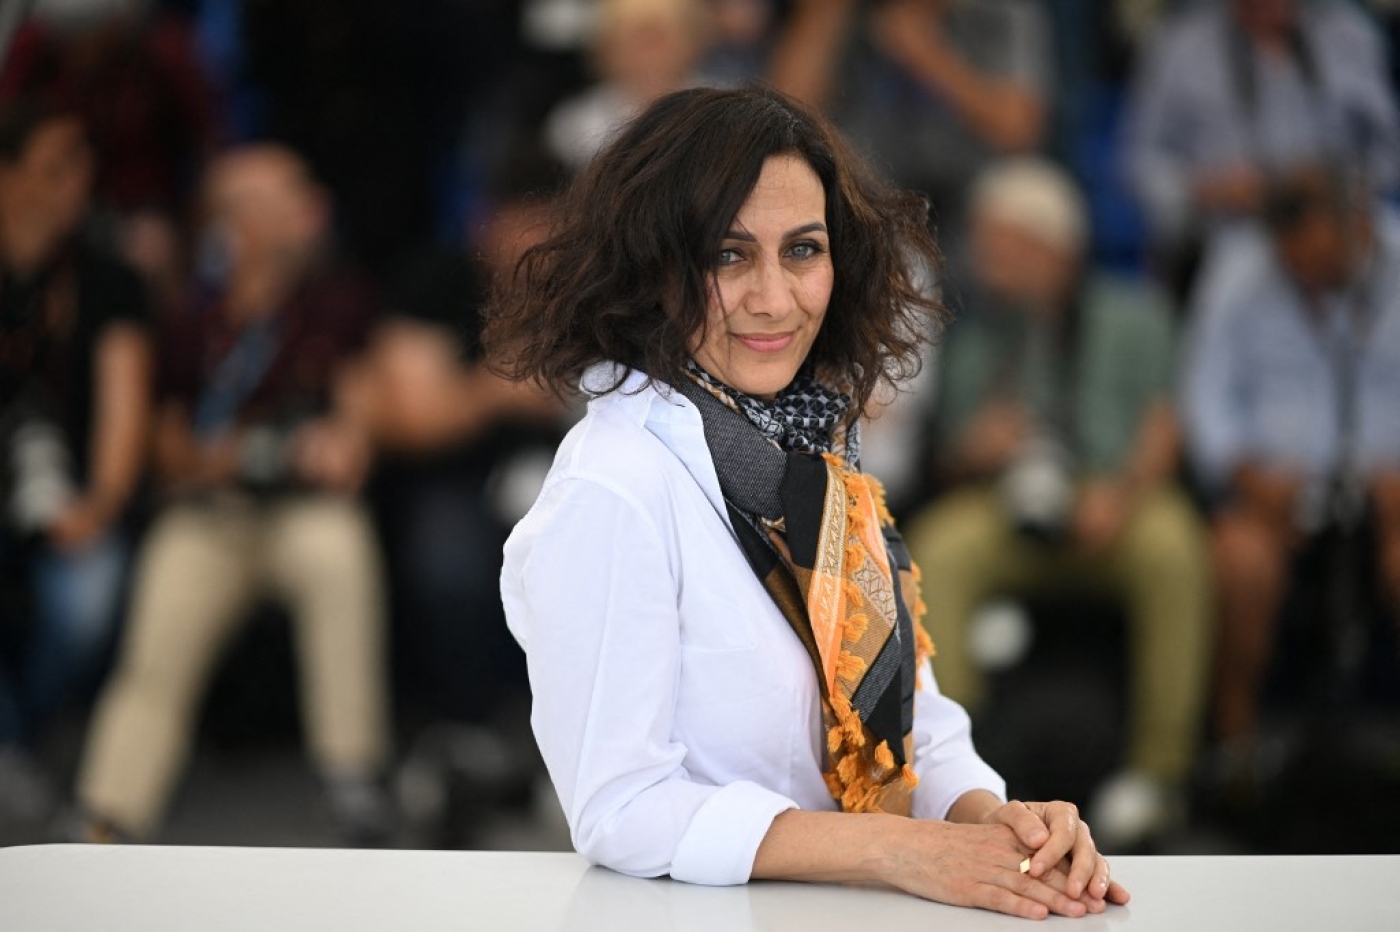 The director of Mediterranean Fever, Maha Haj, is photographed at the 75th edition of the Cannes Film Festival in Cannes, southern France, on 25 May 2022 (AFP)